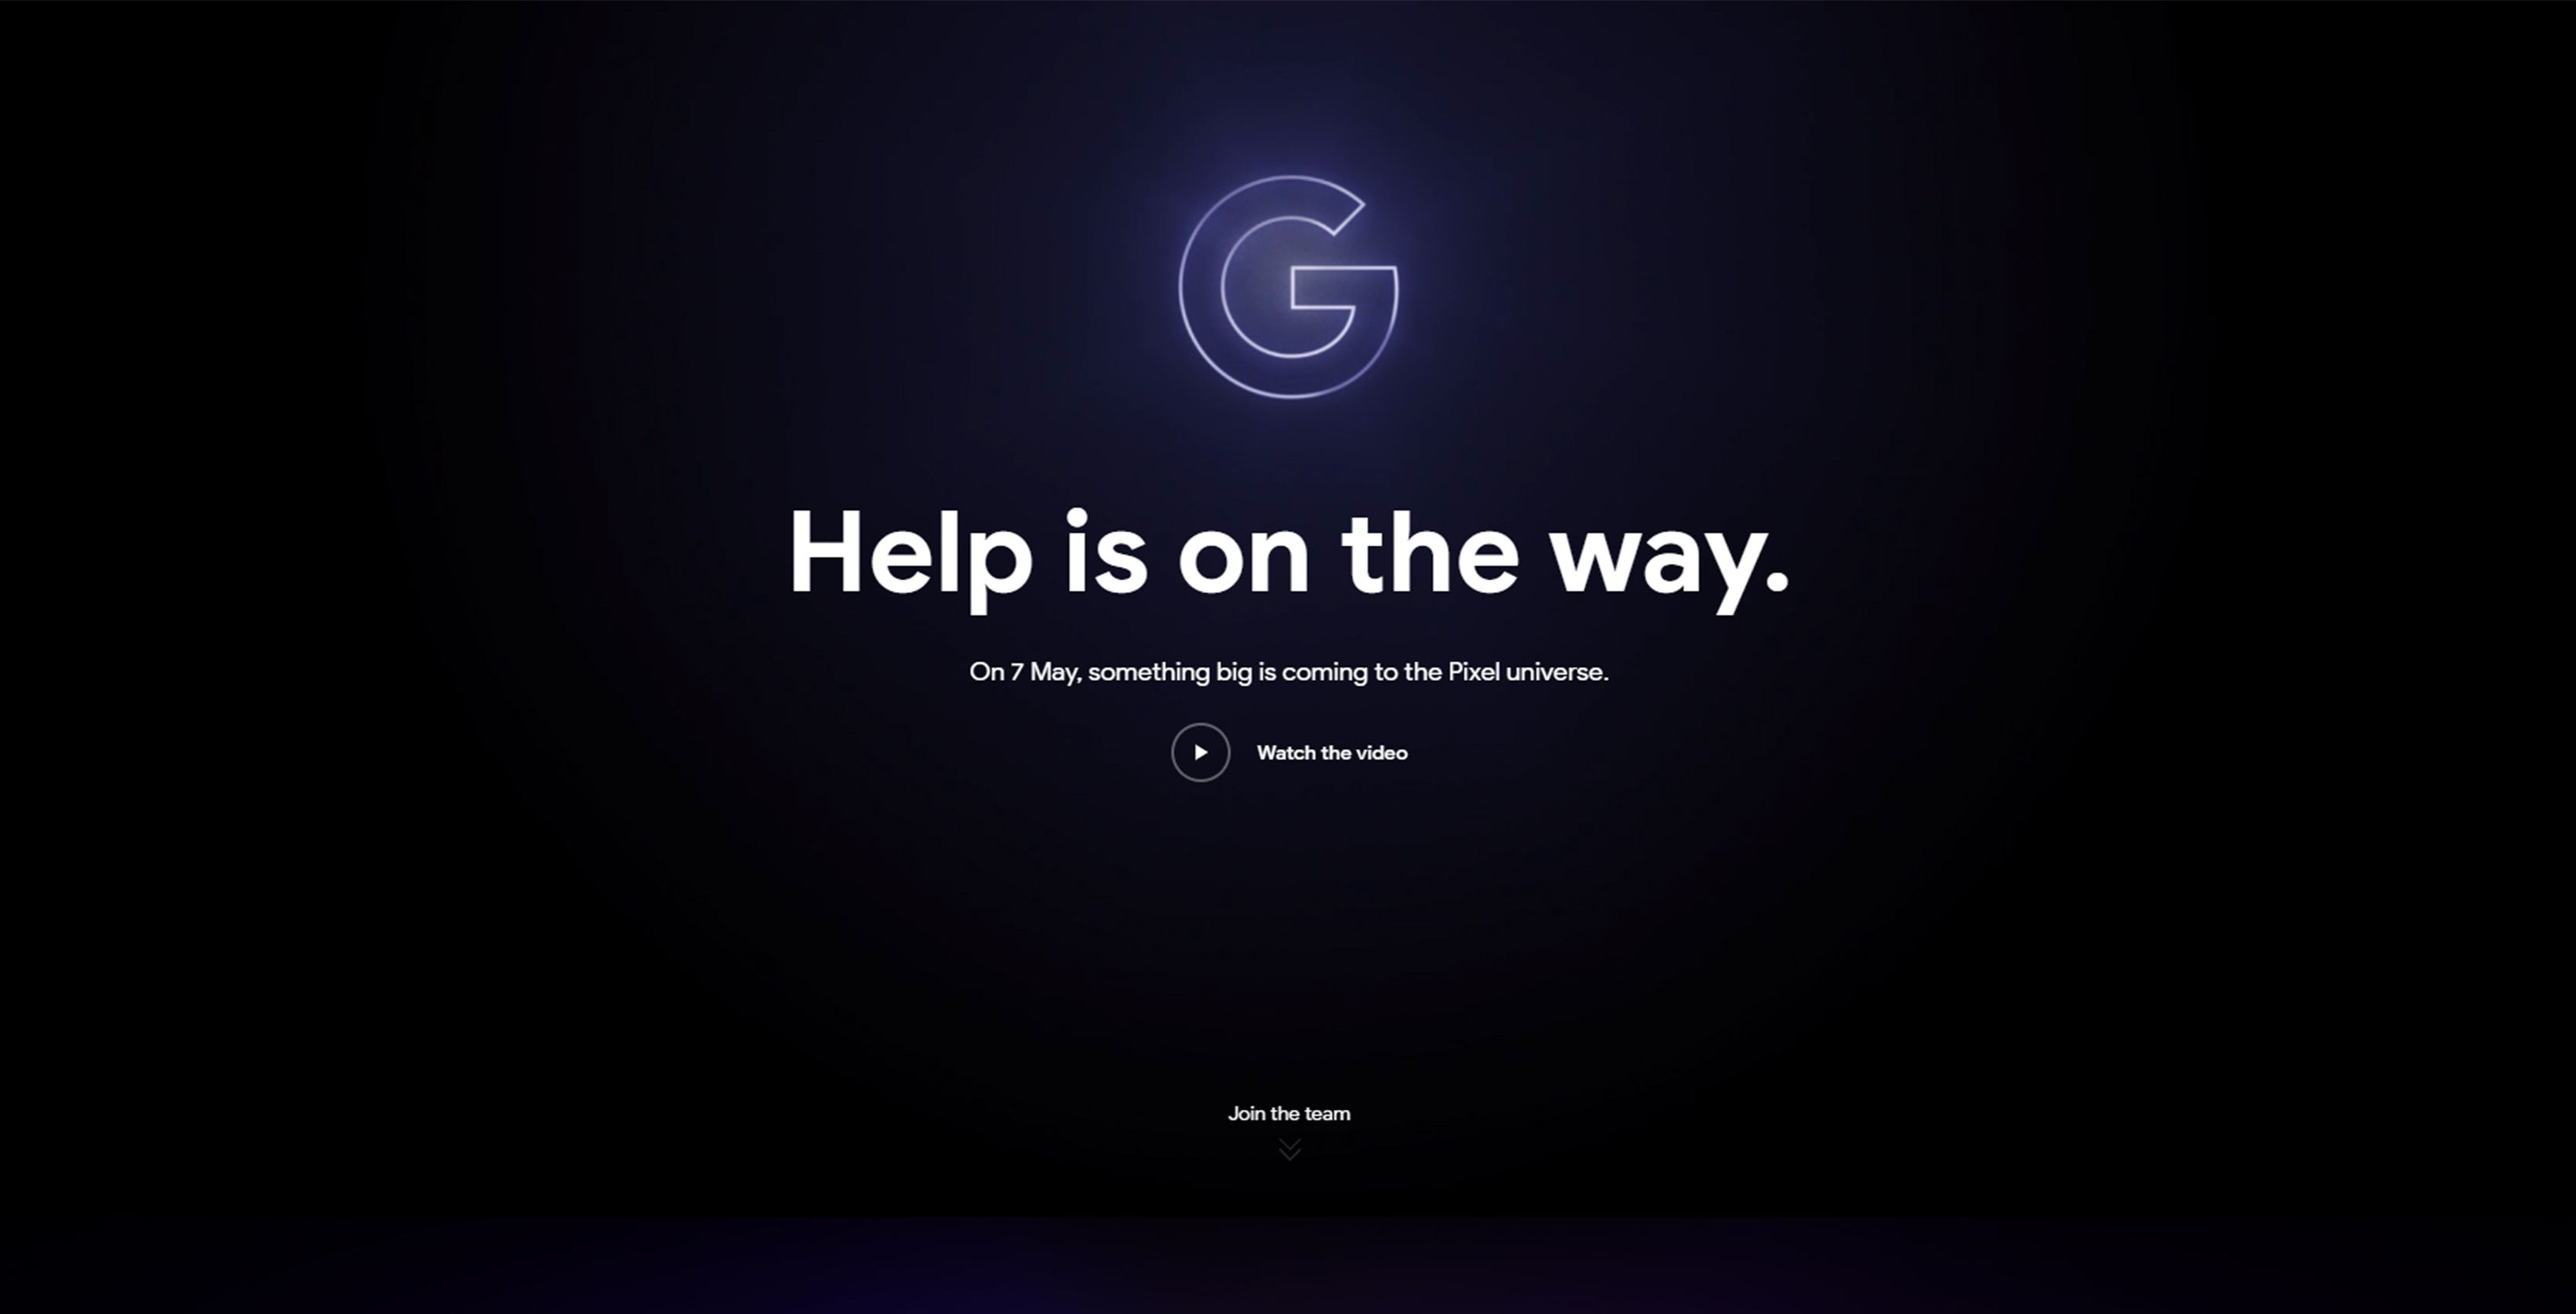 Google 'Help is on the way' teaser